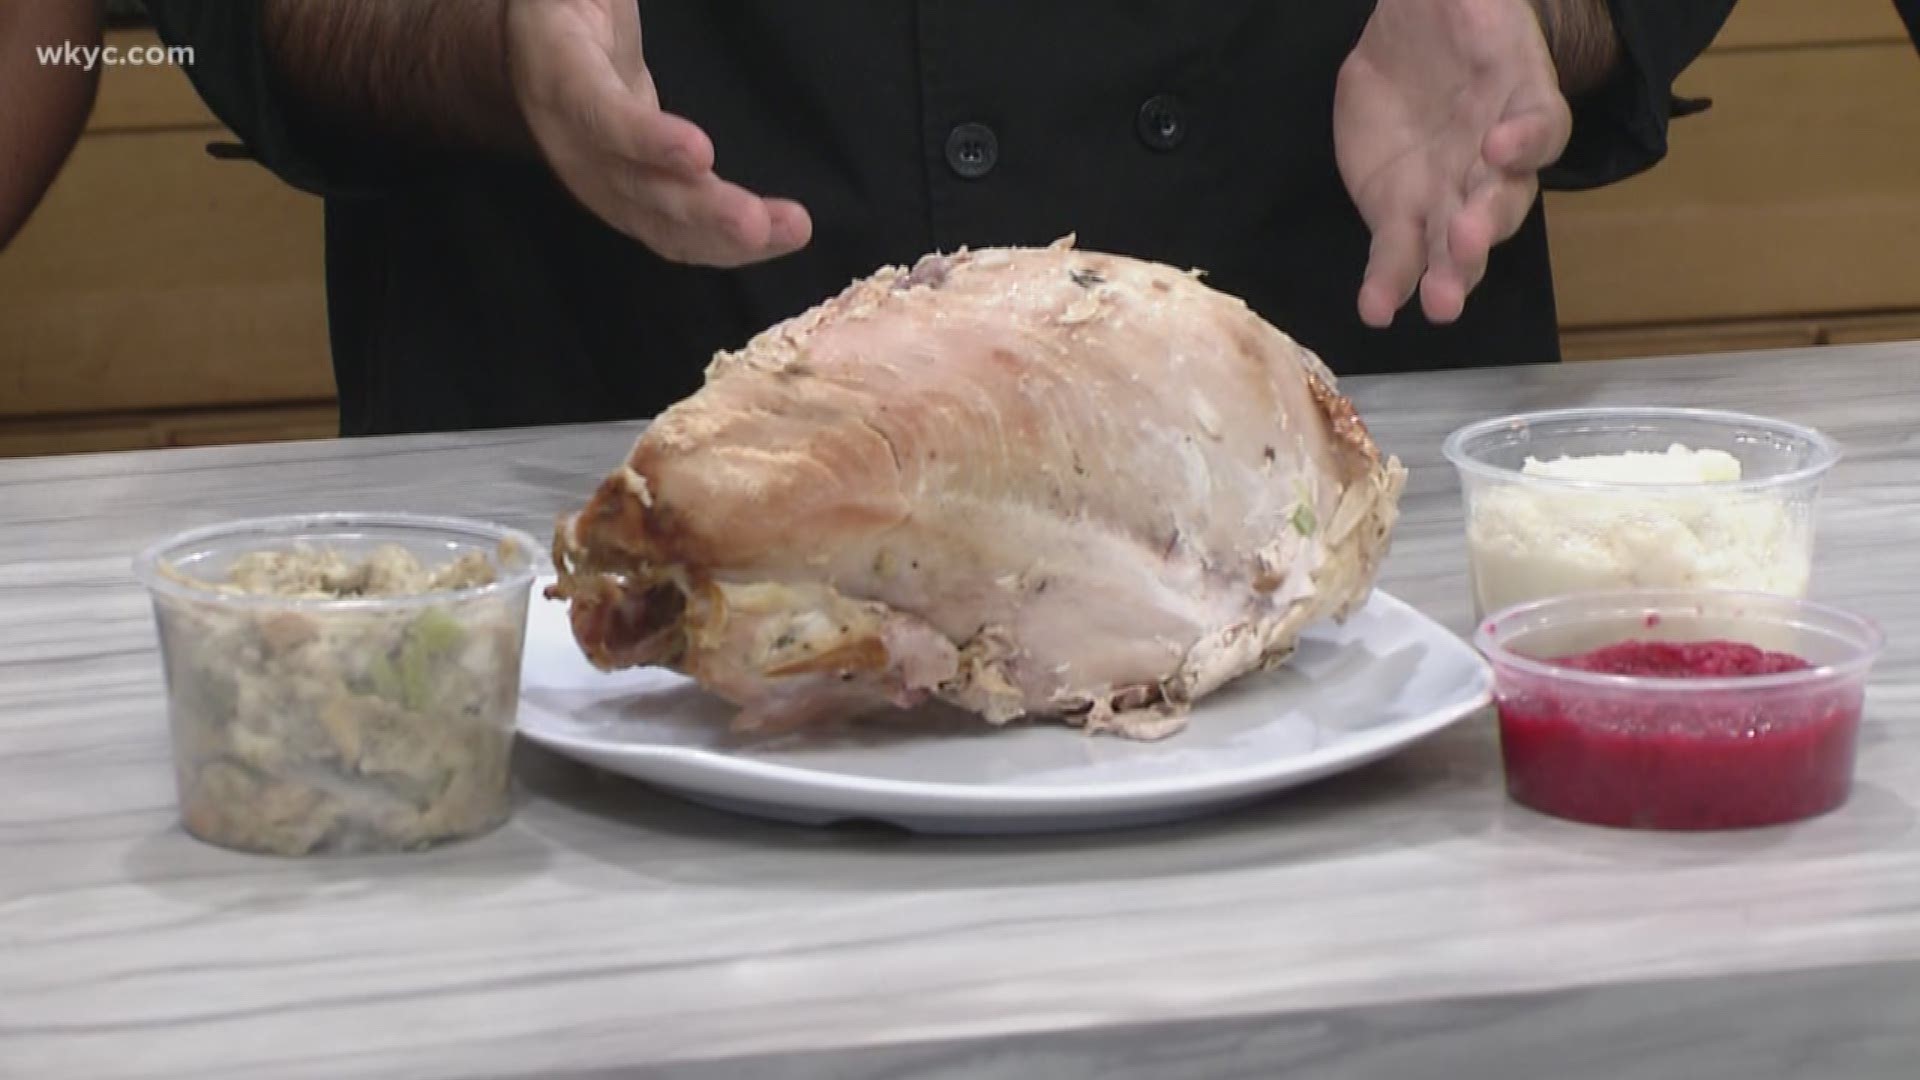 Nov. 23, 2018: If you have some leftover turkey from Thanksgiving dinner, here's what you need to know.